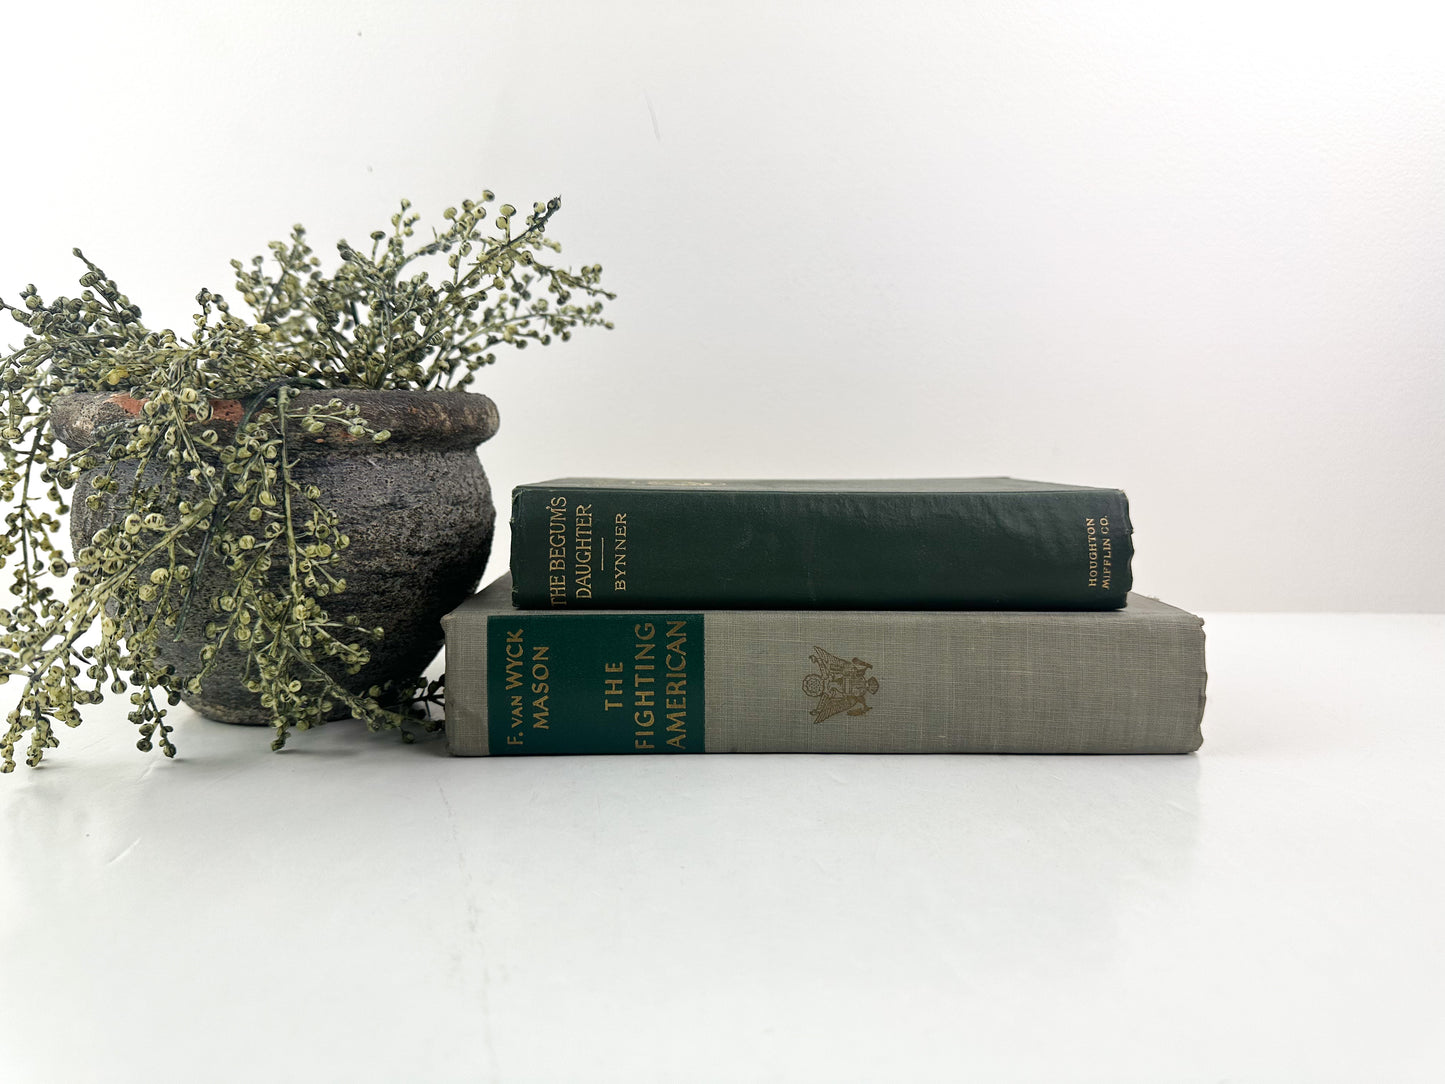 Green and Gray Books